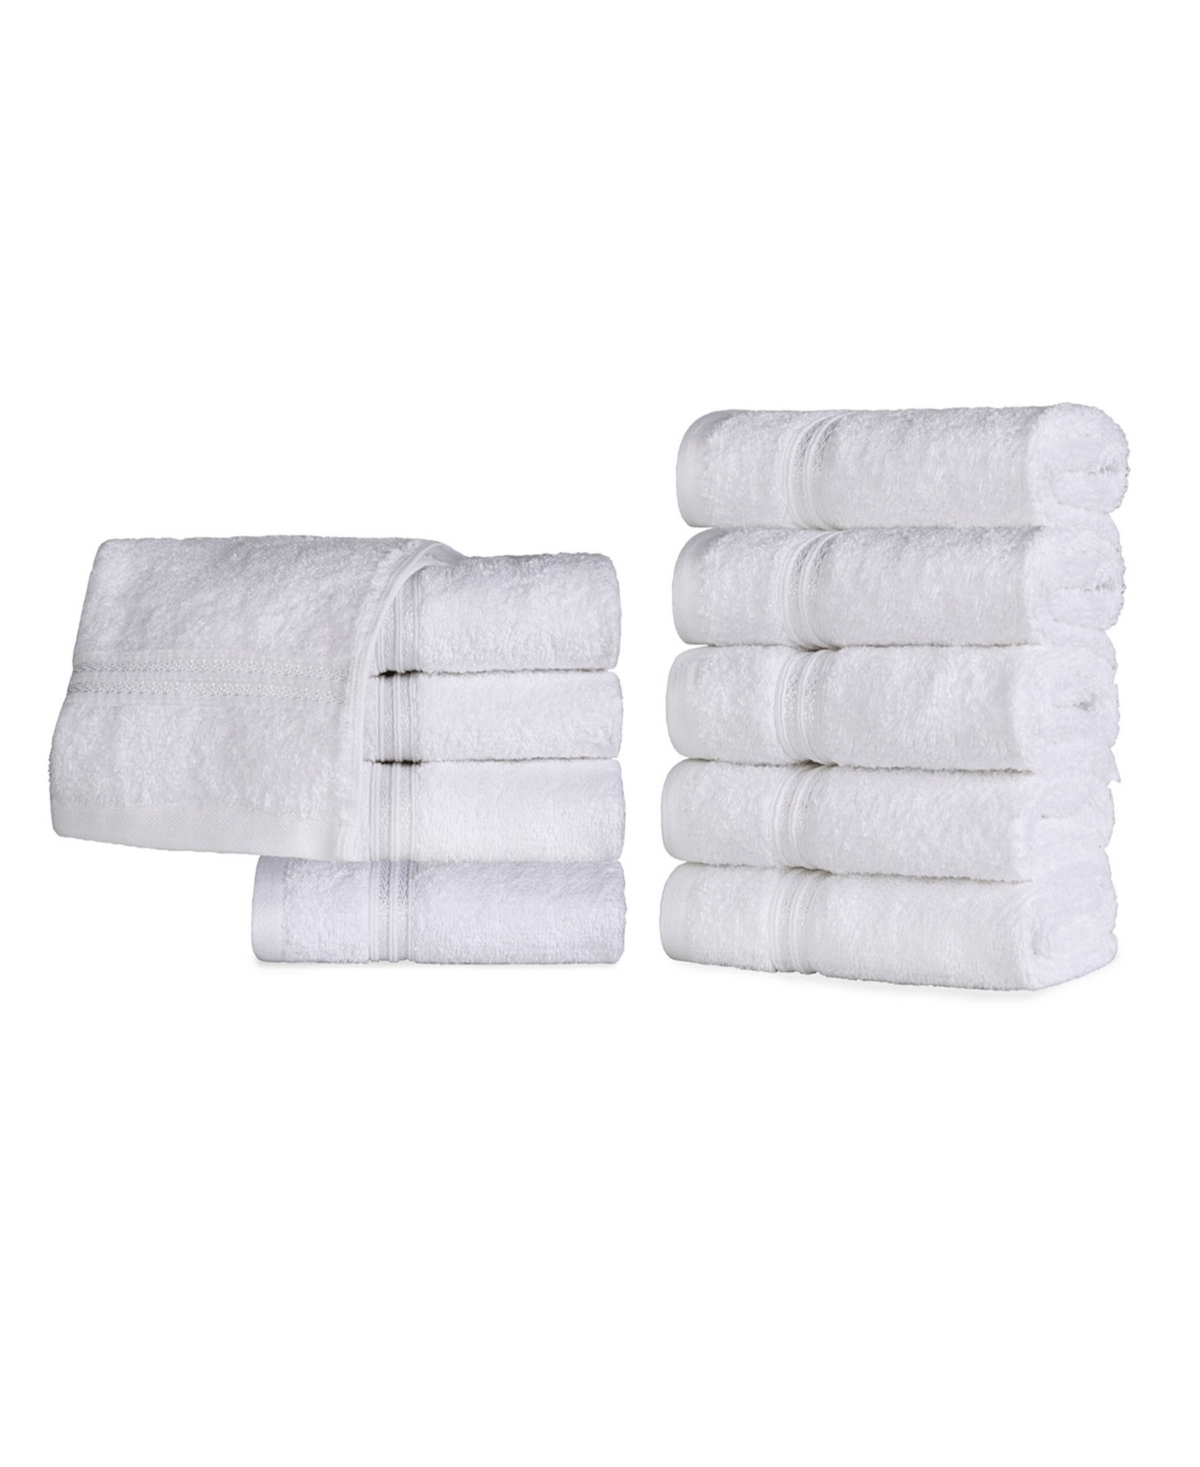 Superior Solid Quick Drying Absorbent 10 Piece Egyptian Cotton Face Towel Set Bedding In White